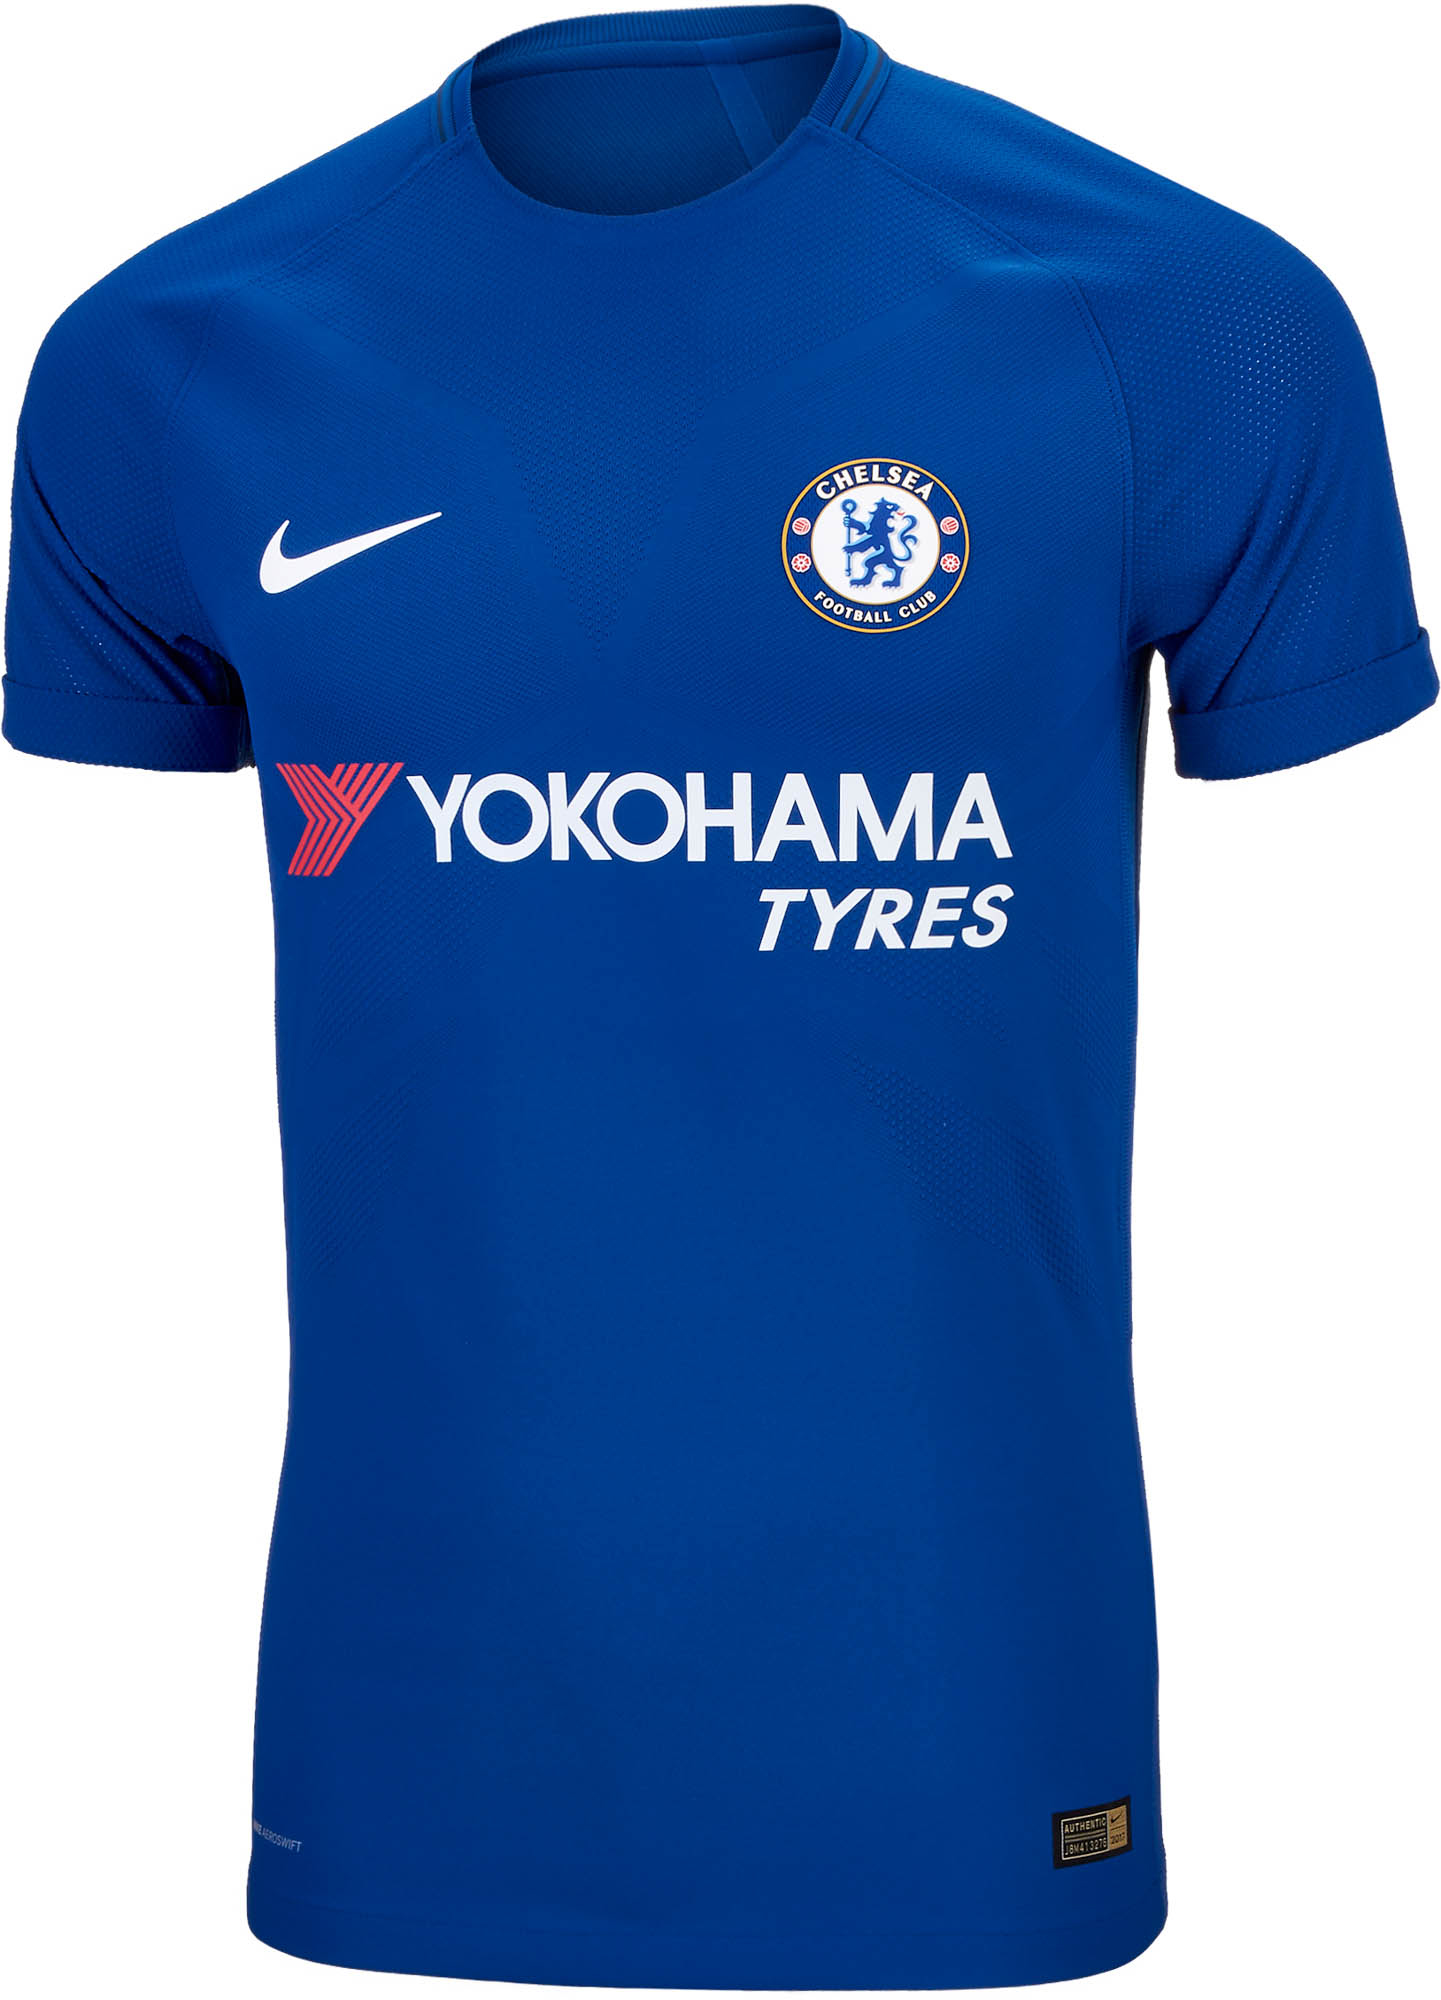 2017/18 Nike Chelsea Match Home Jersey - Chelsea Home Jersey